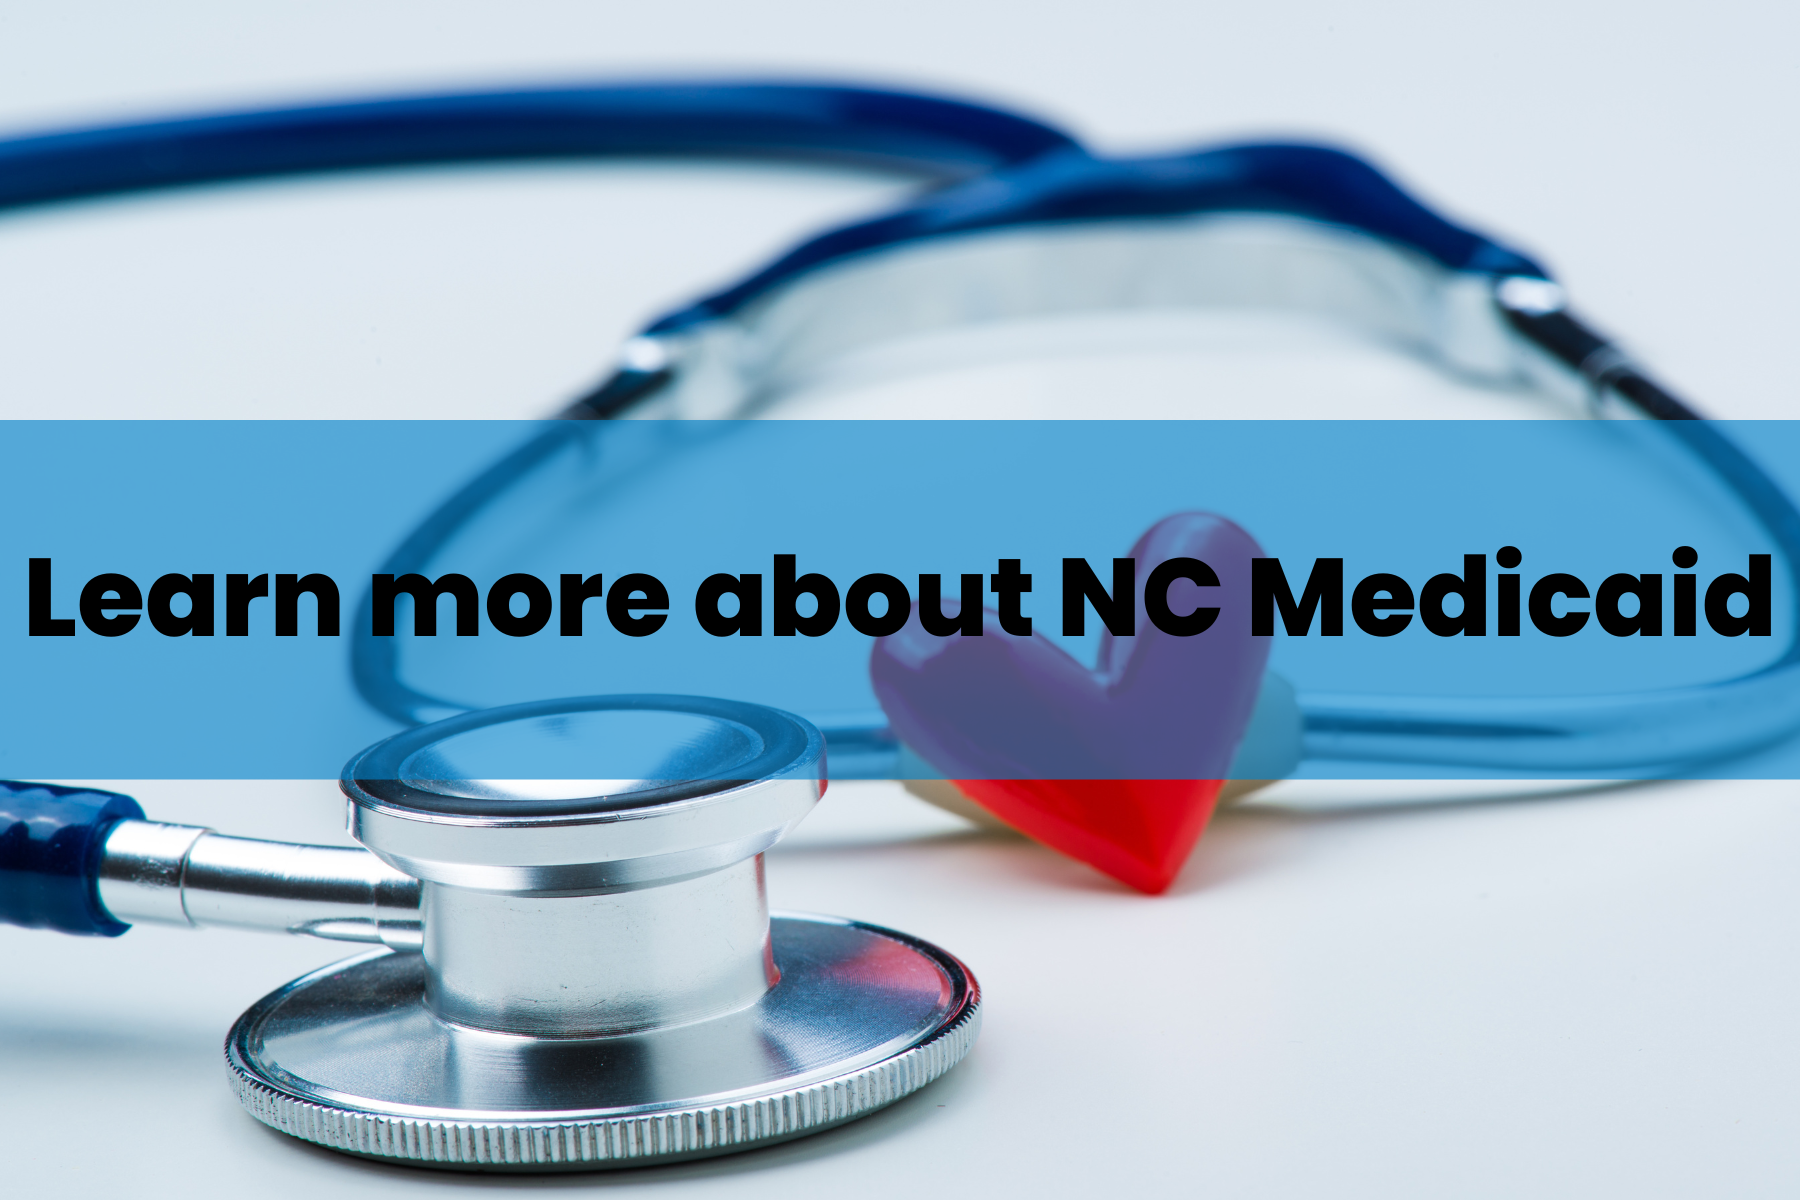 Learn More about NC Medicaid